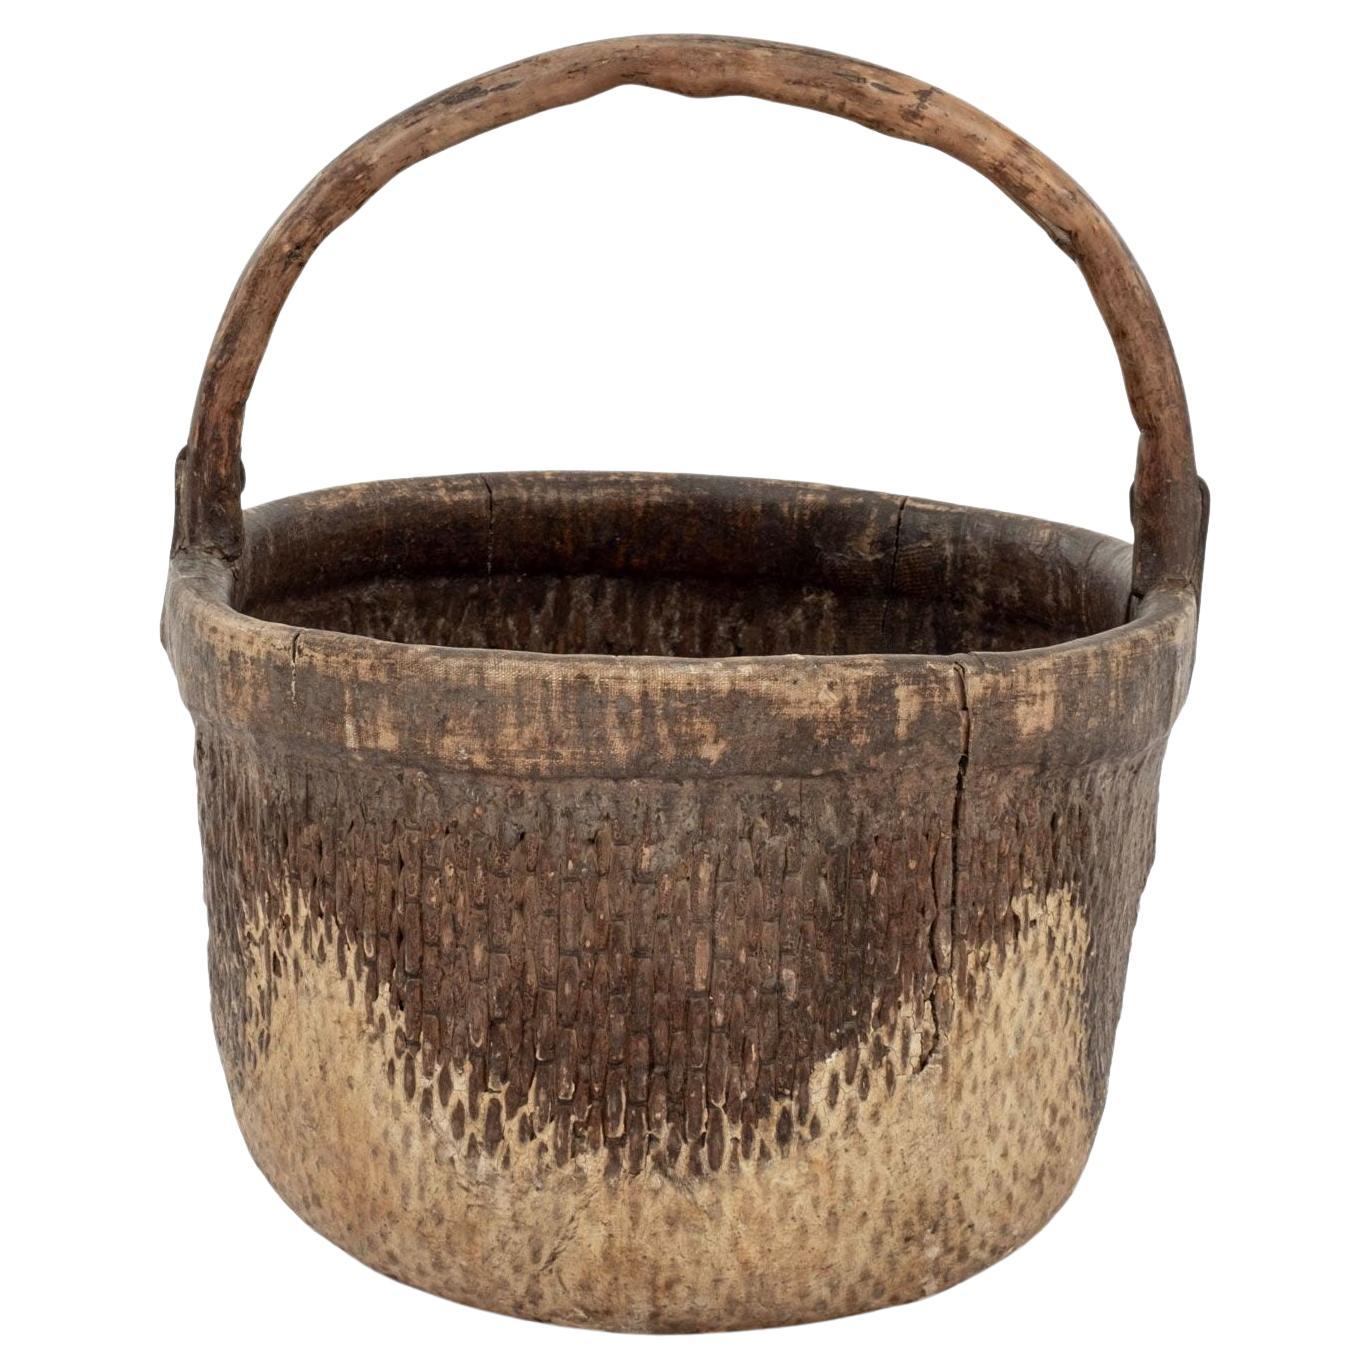 Mid-20th Century Woven Chinese Rice Basket